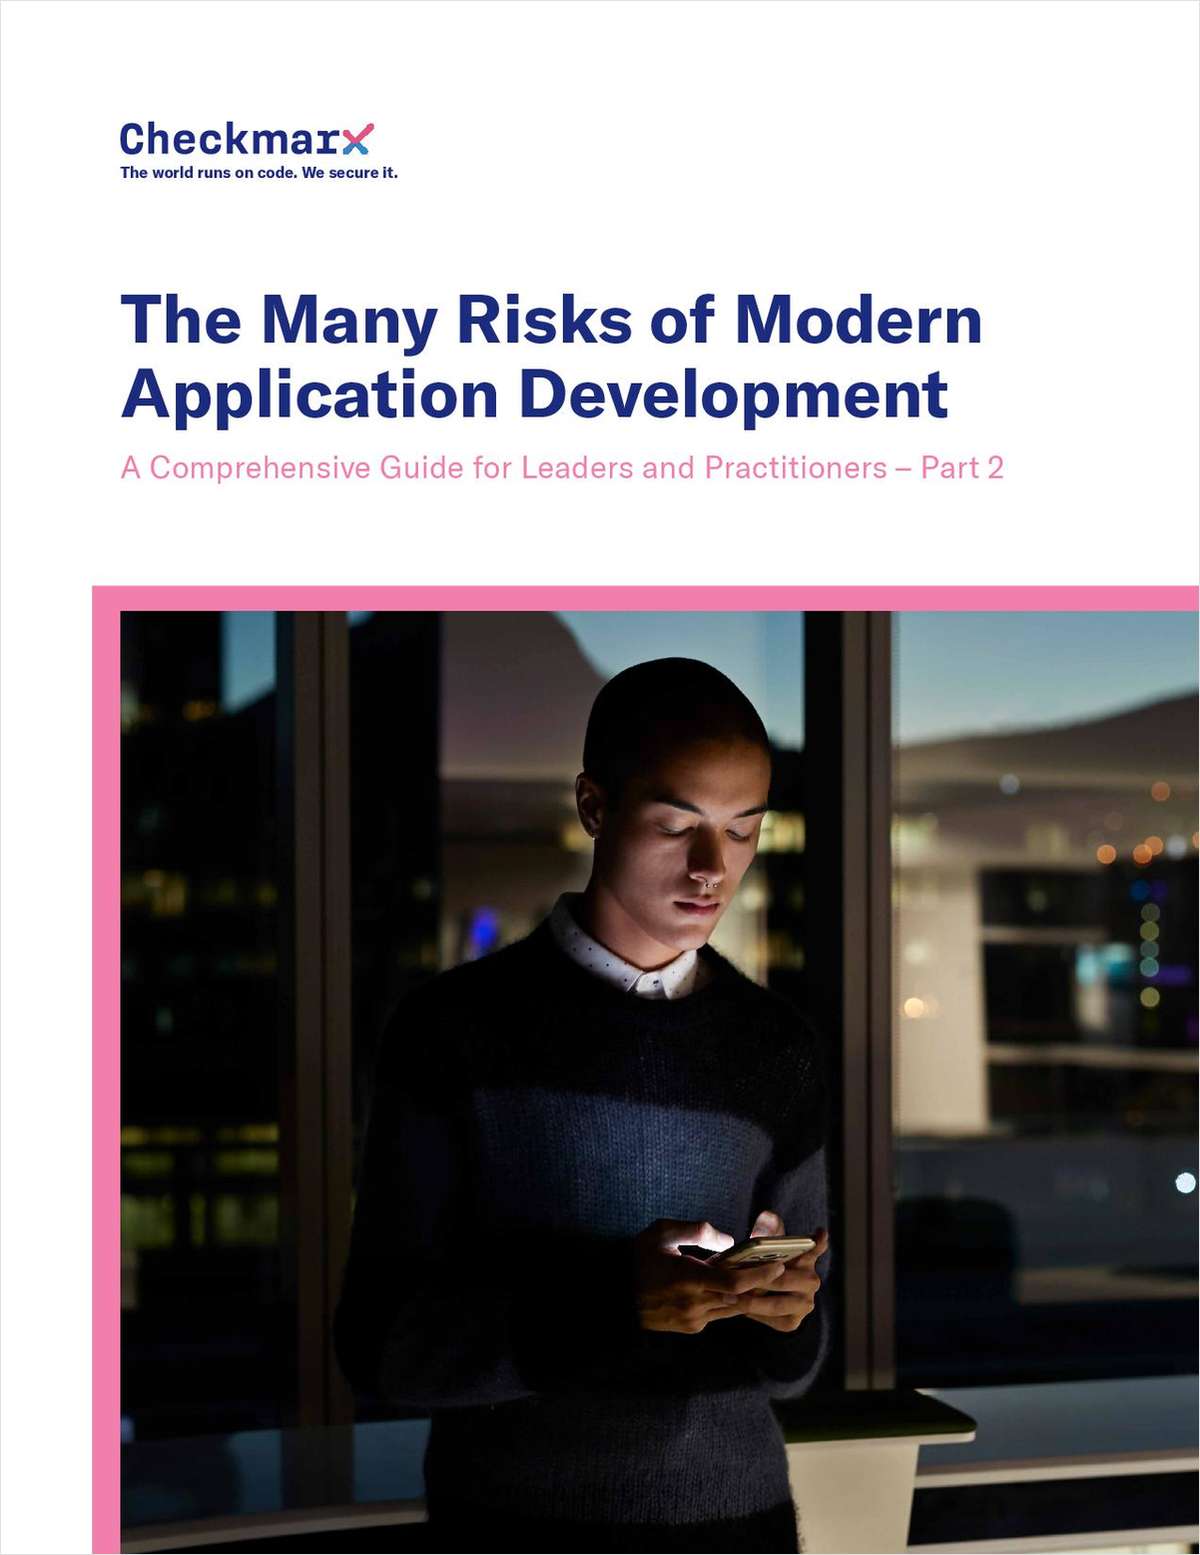 The Many Risks of Modern Application Development(MAD)